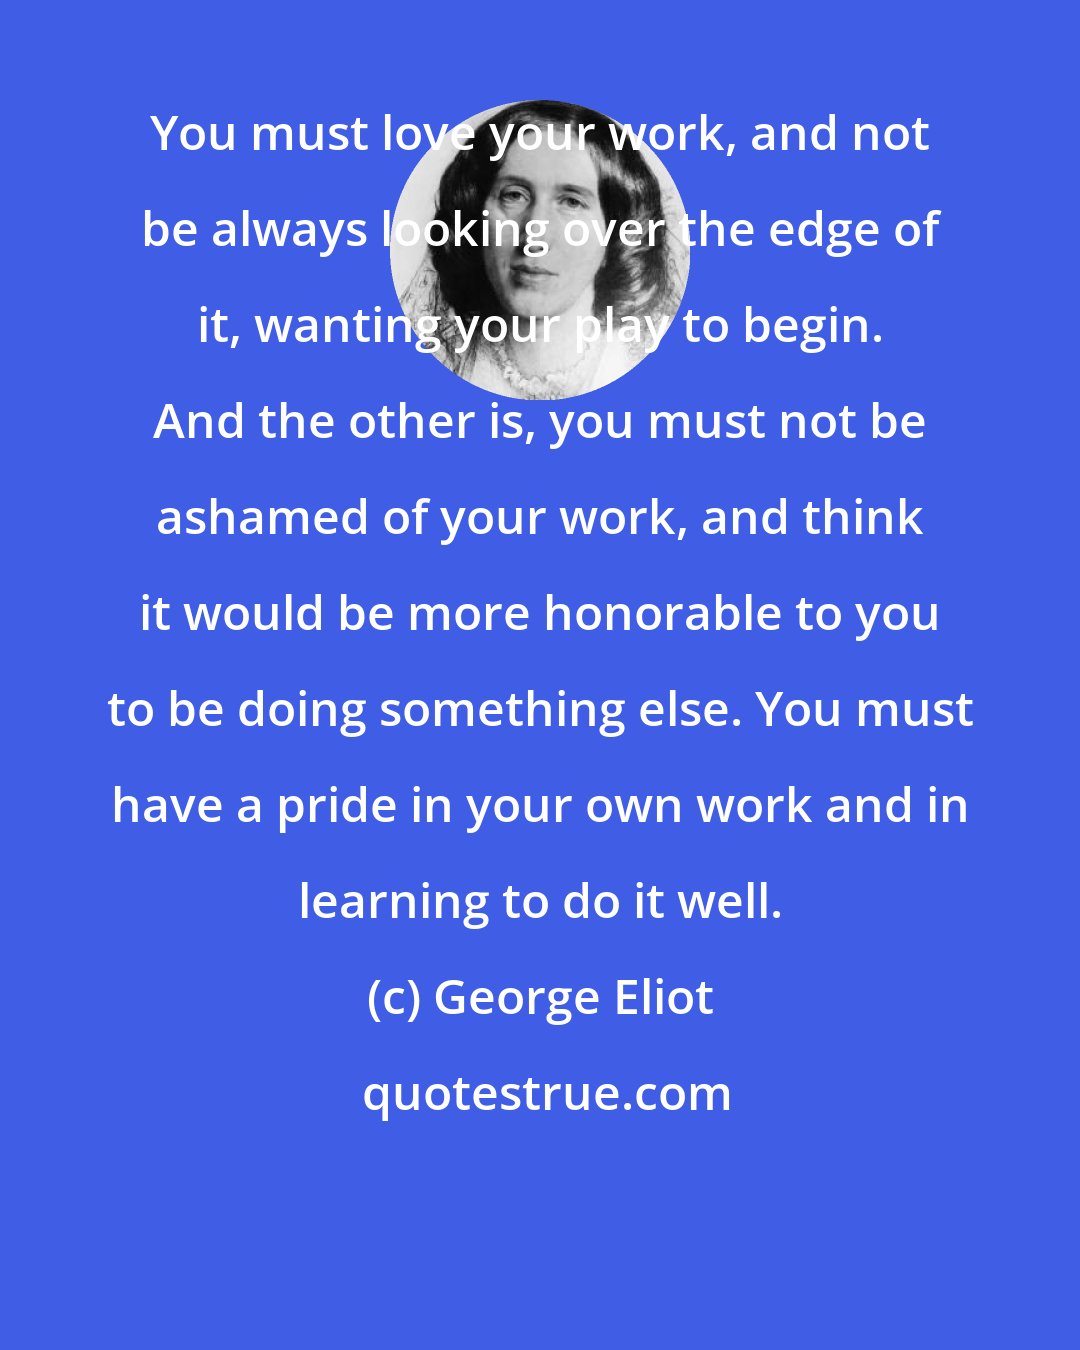 George Eliot: You must love your work, and not be always looking over the edge of it, wanting your play to begin. And the other is, you must not be ashamed of your work, and think it would be more honorable to you to be doing something else. You must have a pride in your own work and in learning to do it well.